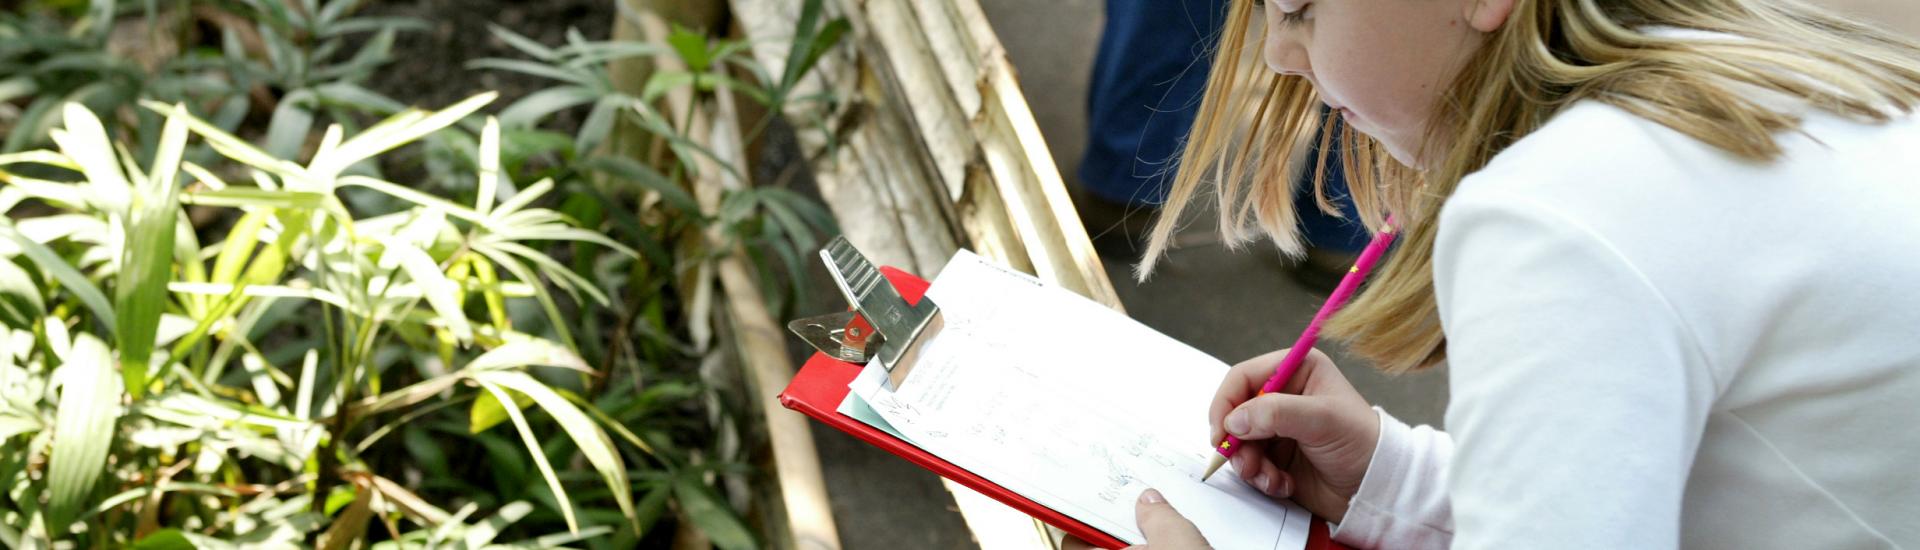 A young girl is looking over a wooden fence at a group of plants and is filling in a sheet of paper on a clipboard